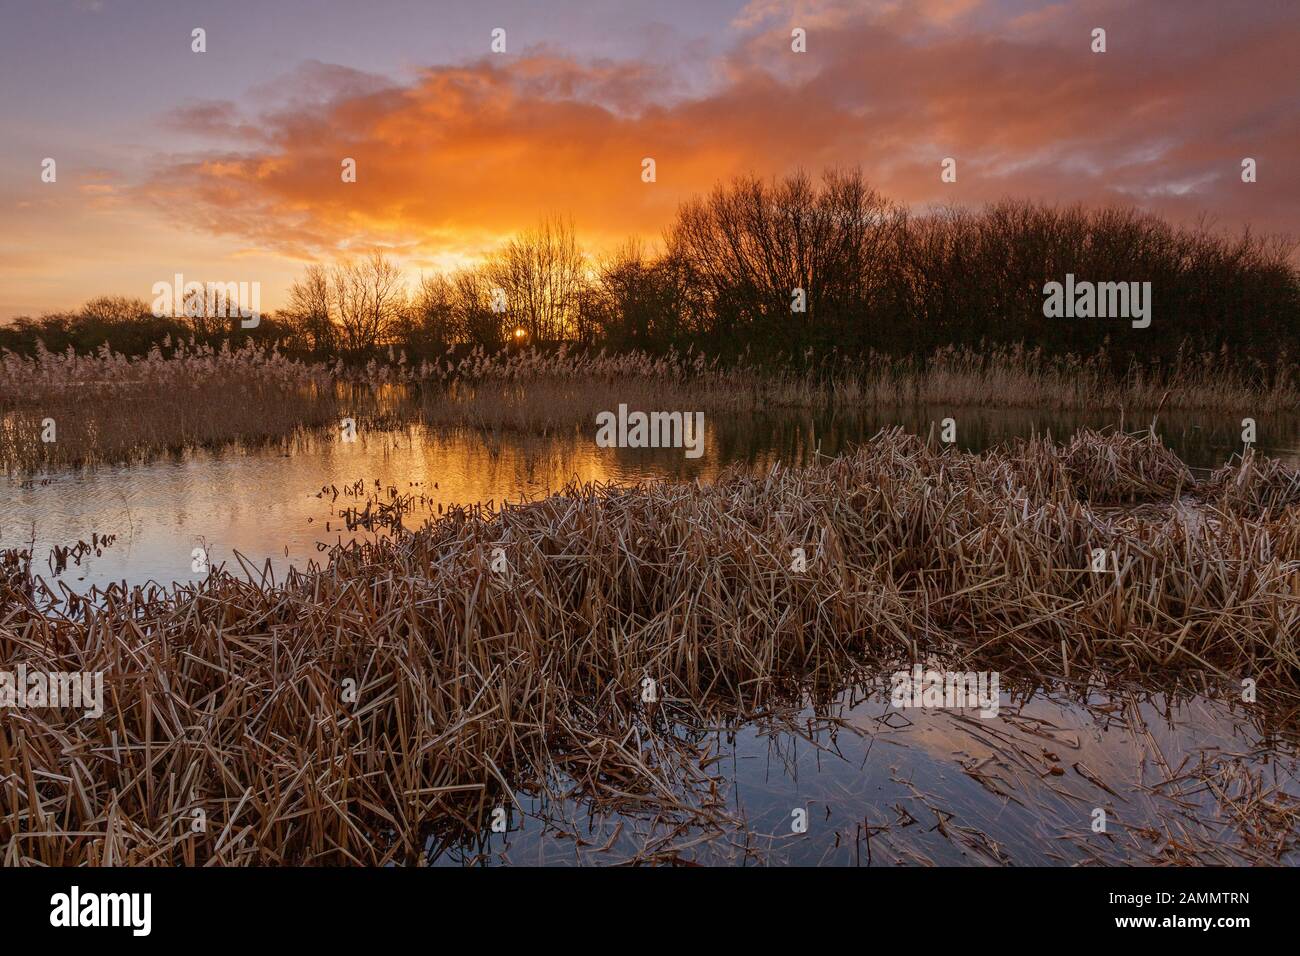 Barton-upon-Humber, North Lincolnshire, UK. 14th January 2020. UK Weather: Sunrise at a nature reserve on a windy Winter morning. Credit: LEE BEEL/Alamy Live News. Stock Photo